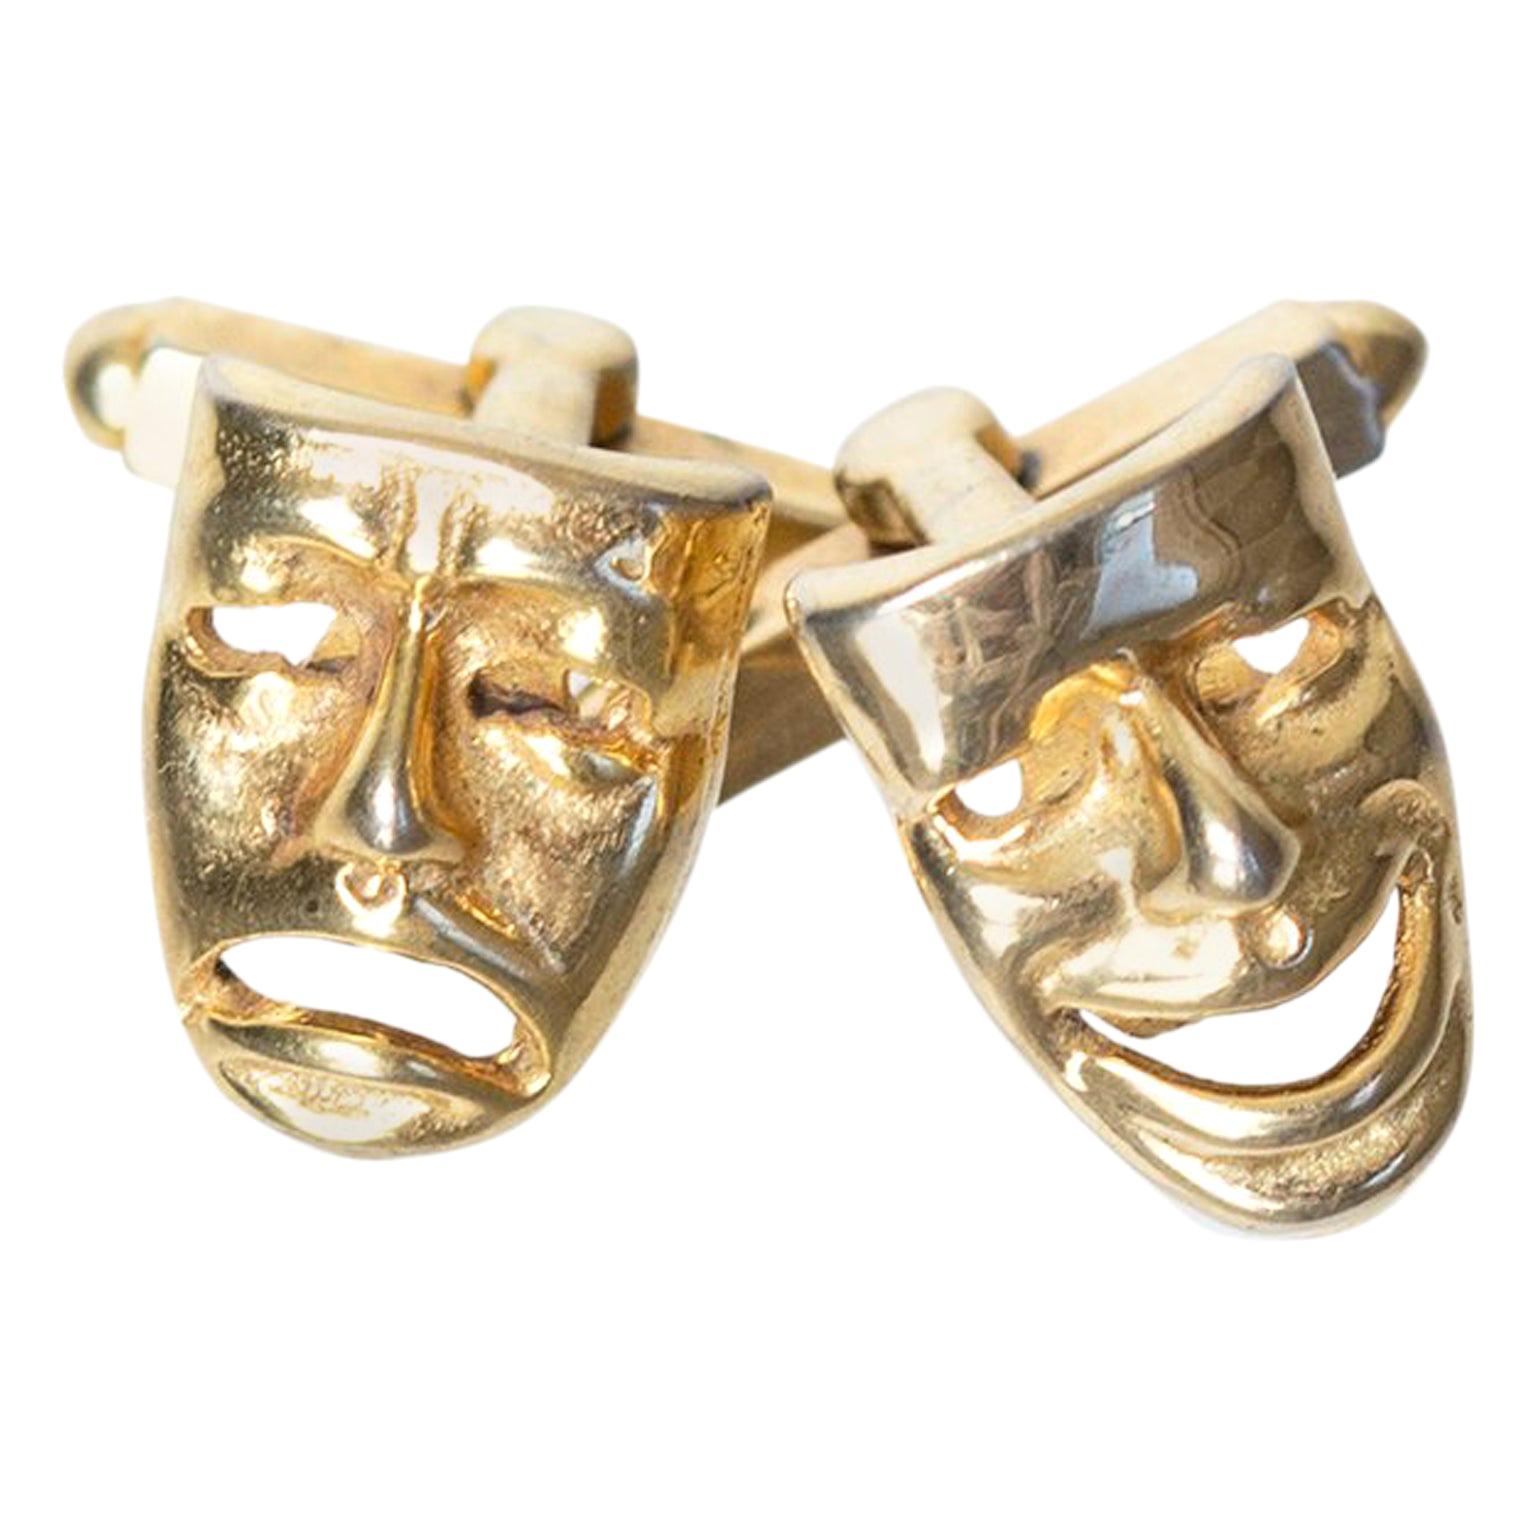 Men's Vintage Gold Comedy and Tragedy Theater Mask Cuff Links, 1960s